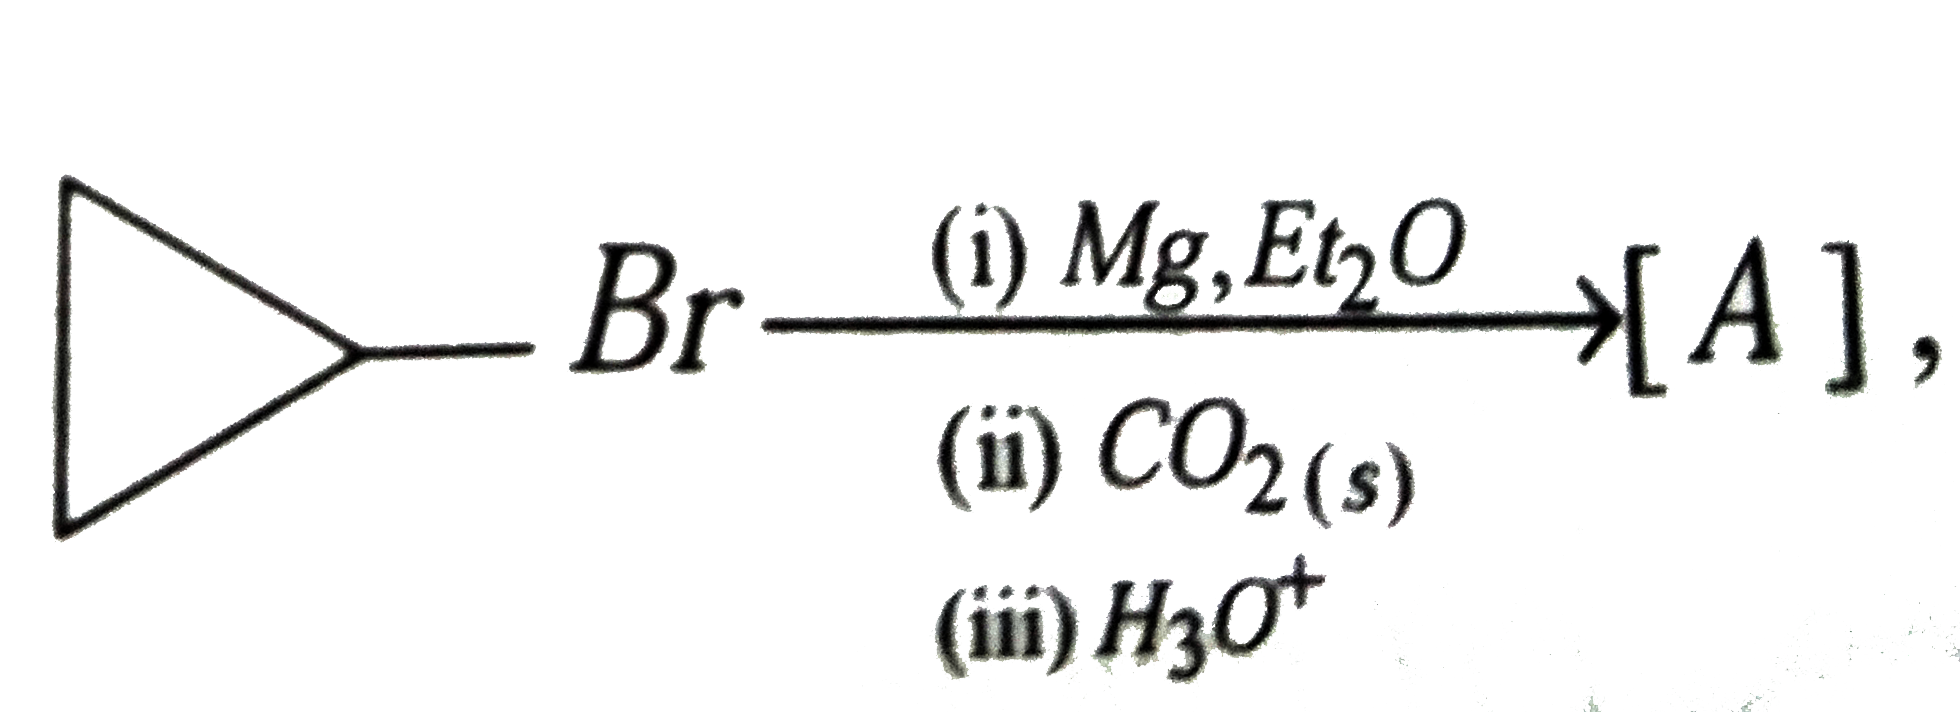 For the following reaction,  product [A] is